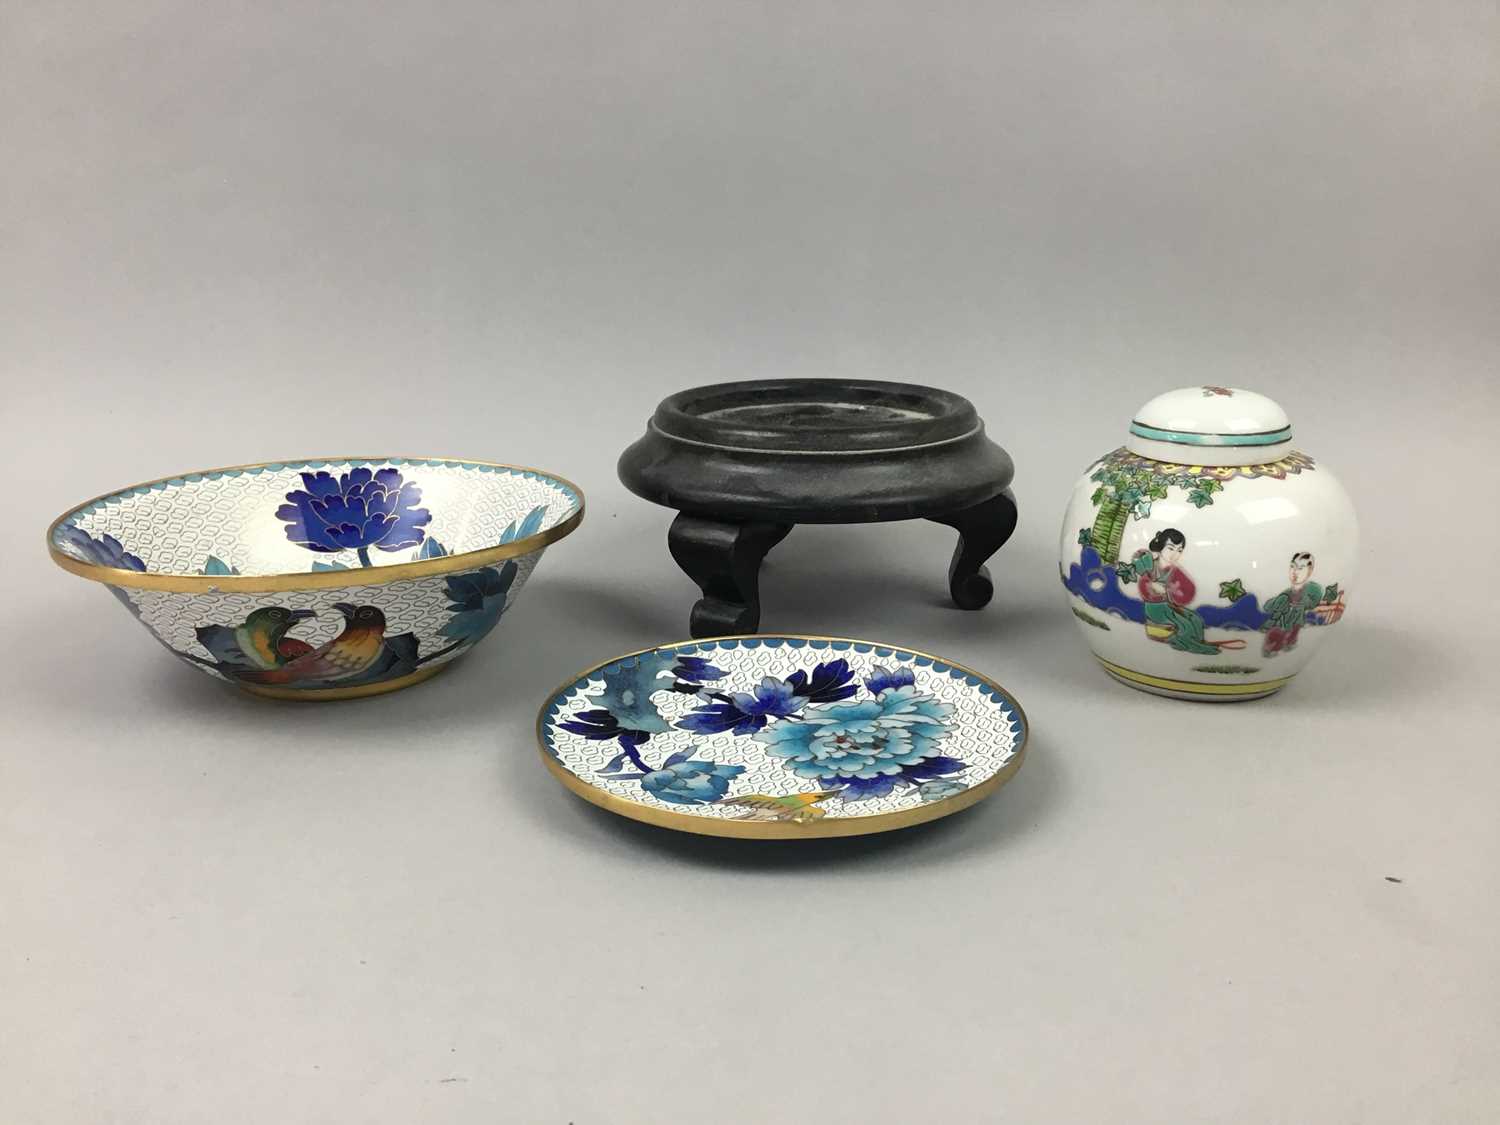 Lot 69 - AN EARLY 20TH CENTURY CHINESE ENAMEL BOWL, SIMILAR DISH, GINGER JAR AND STAND